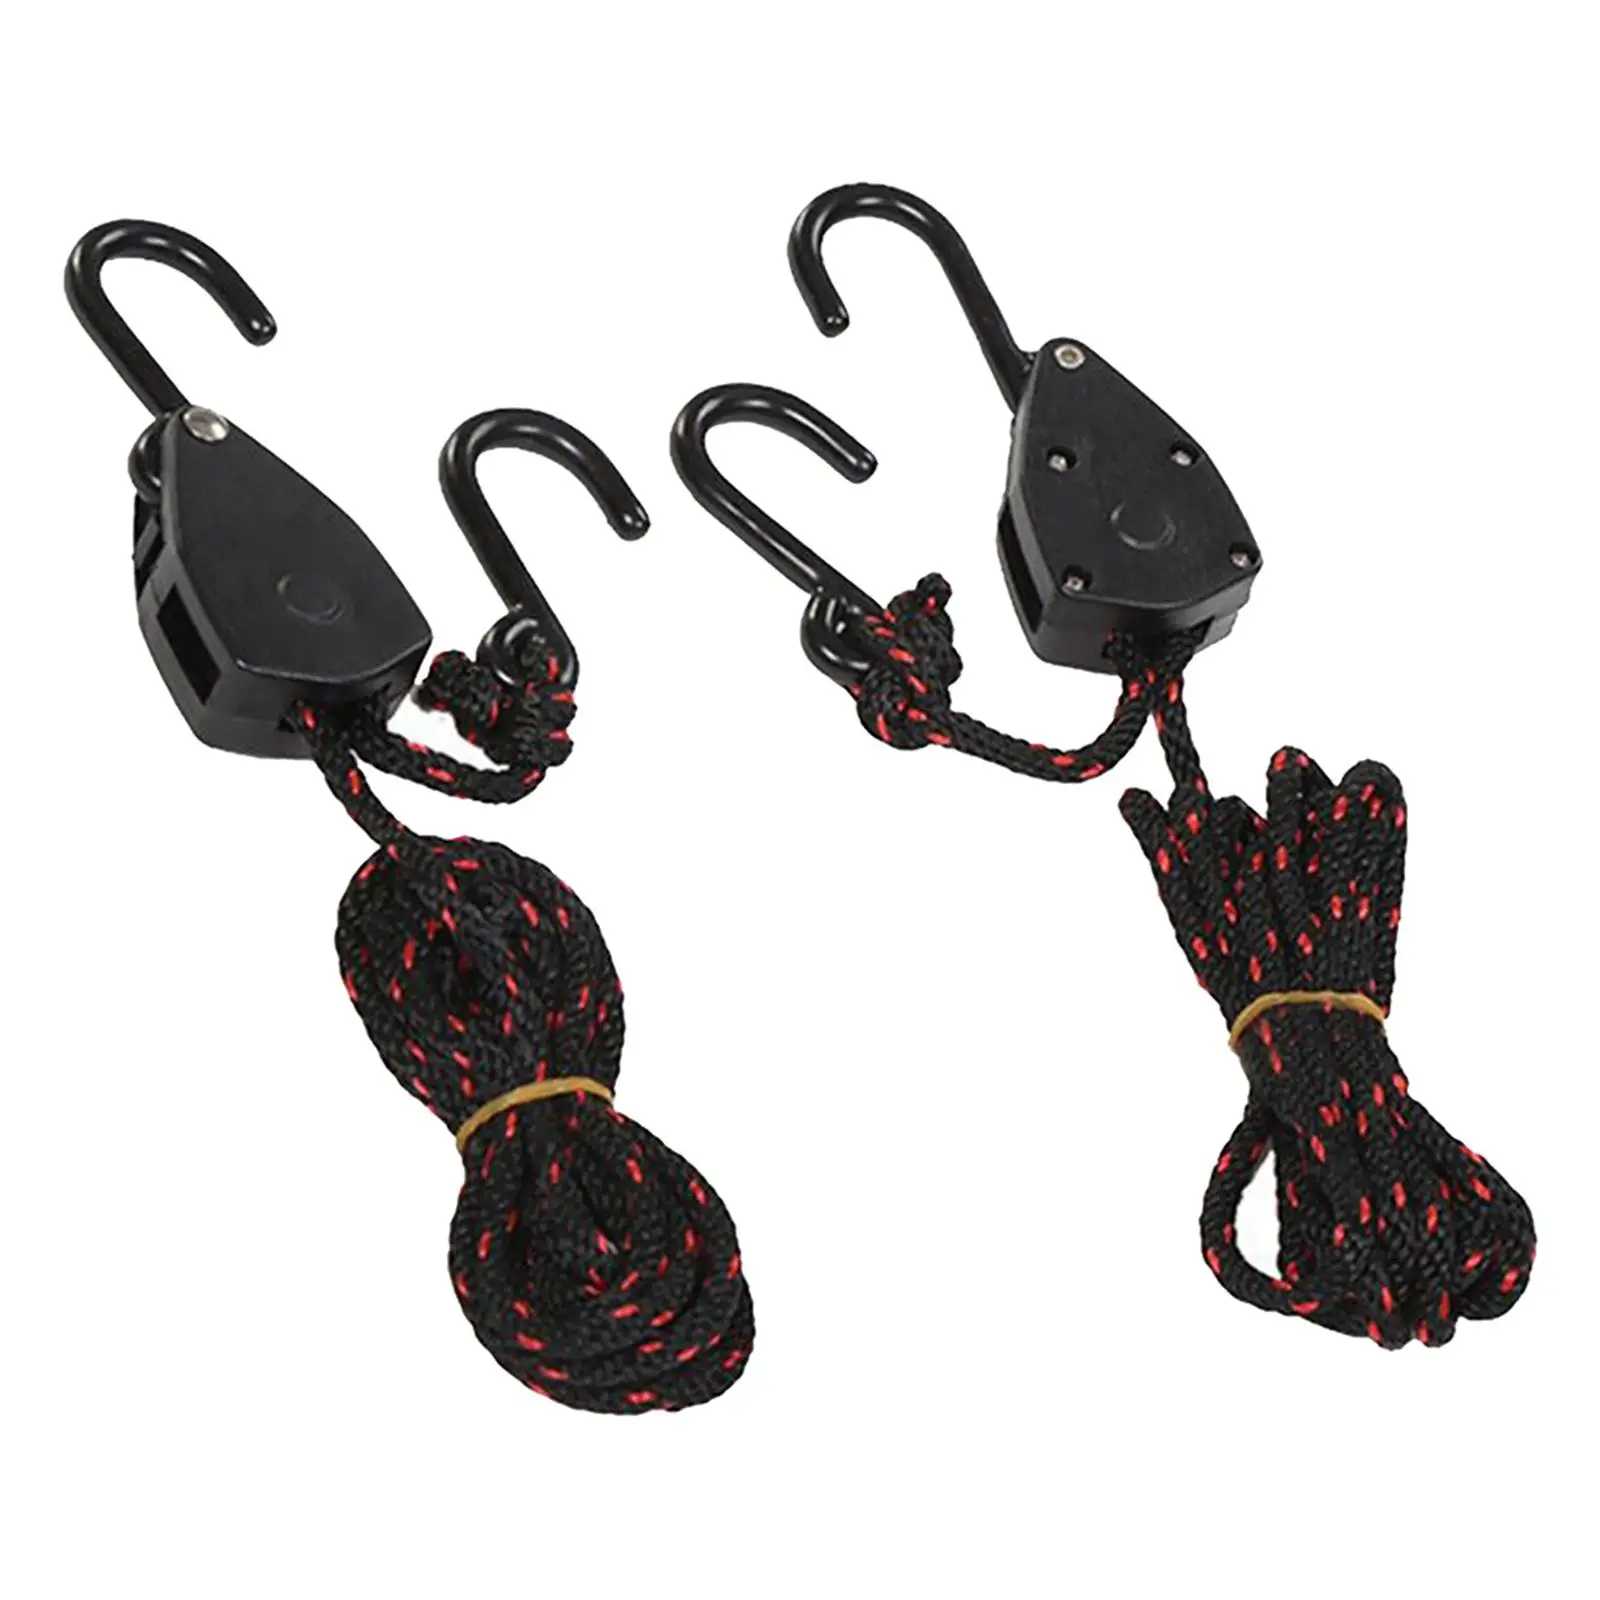 (Set of 2) - Ratchet Kayak and Canoe Bow and Stern Tie Down